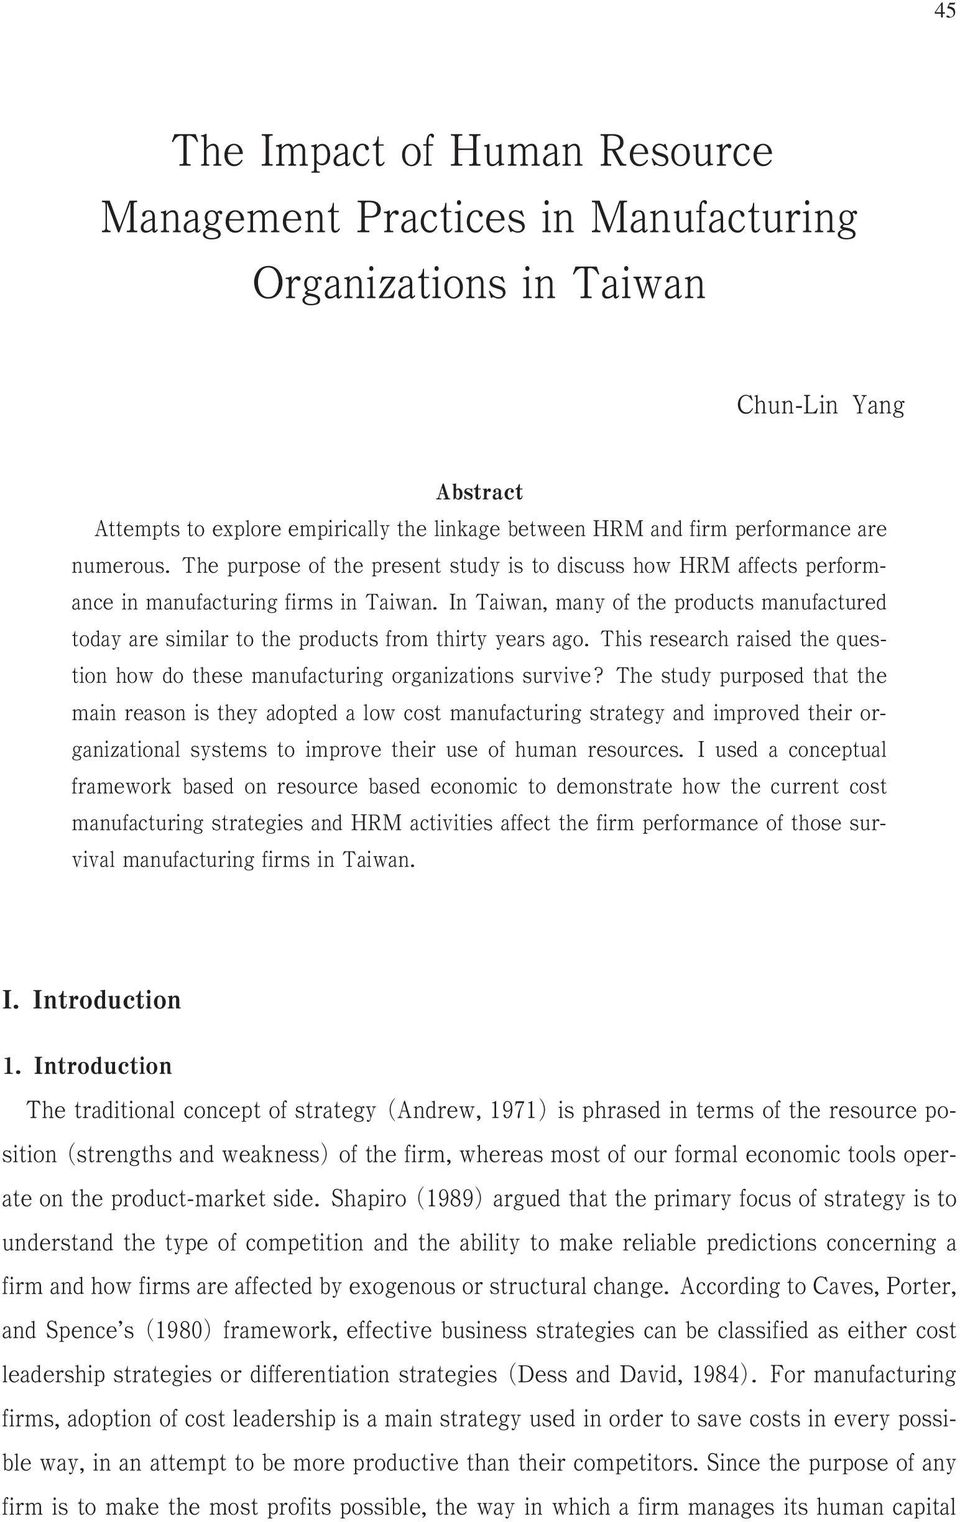 In Taiwan, many of the products manufactured today are similar to the products from thirty years ago. This research raised the question how do these manufacturing organizations survive?